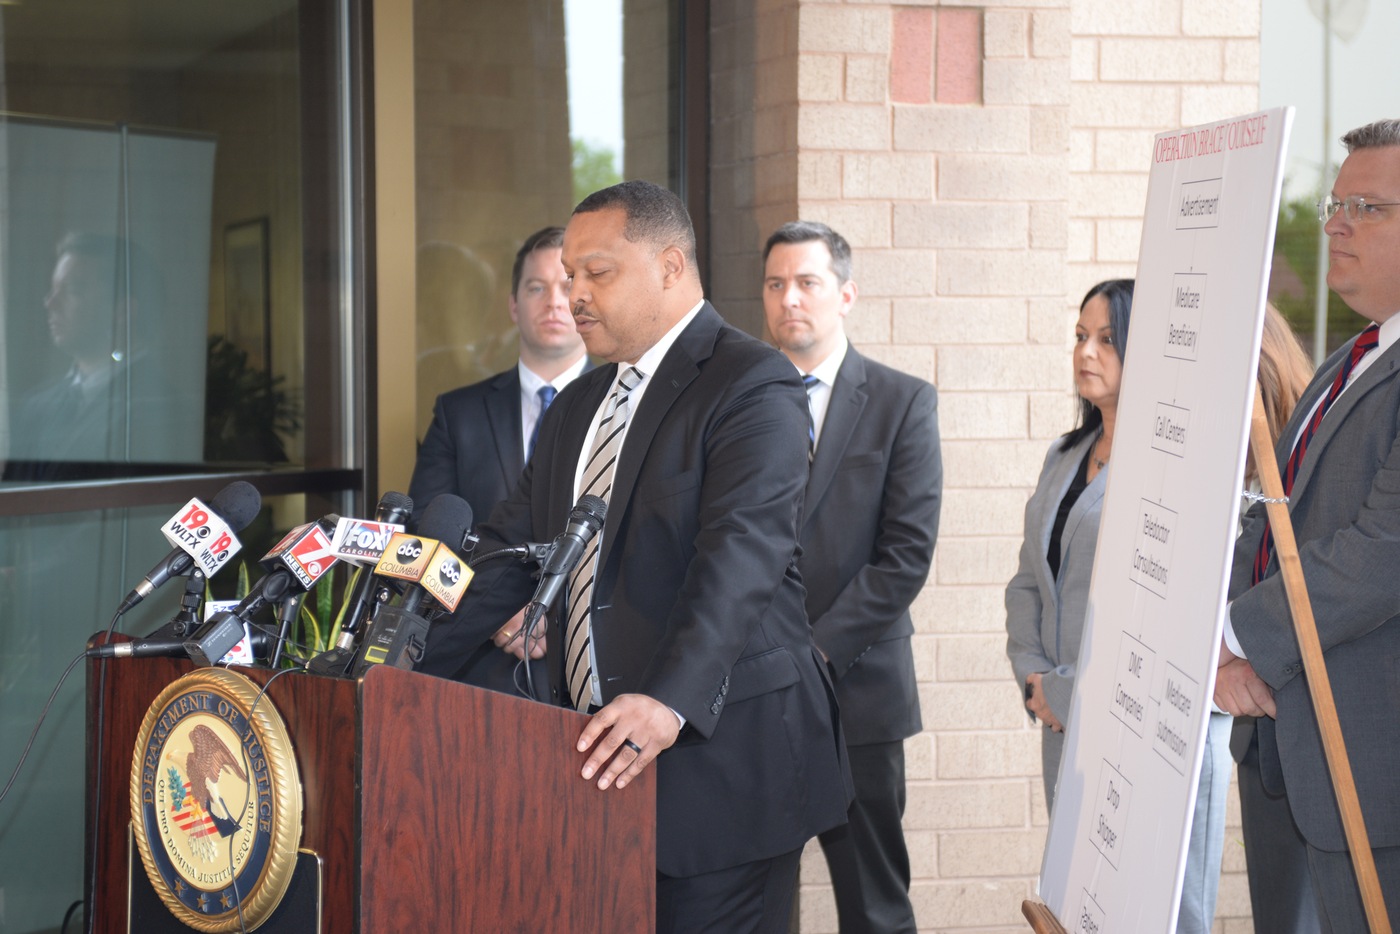 FBI Columbia Special Agent in Charge Jody Norris speaks at an April 9, 2019 press conference announcing charges against 24 defendants in a $1.2 billion Medicare fraud scheme.